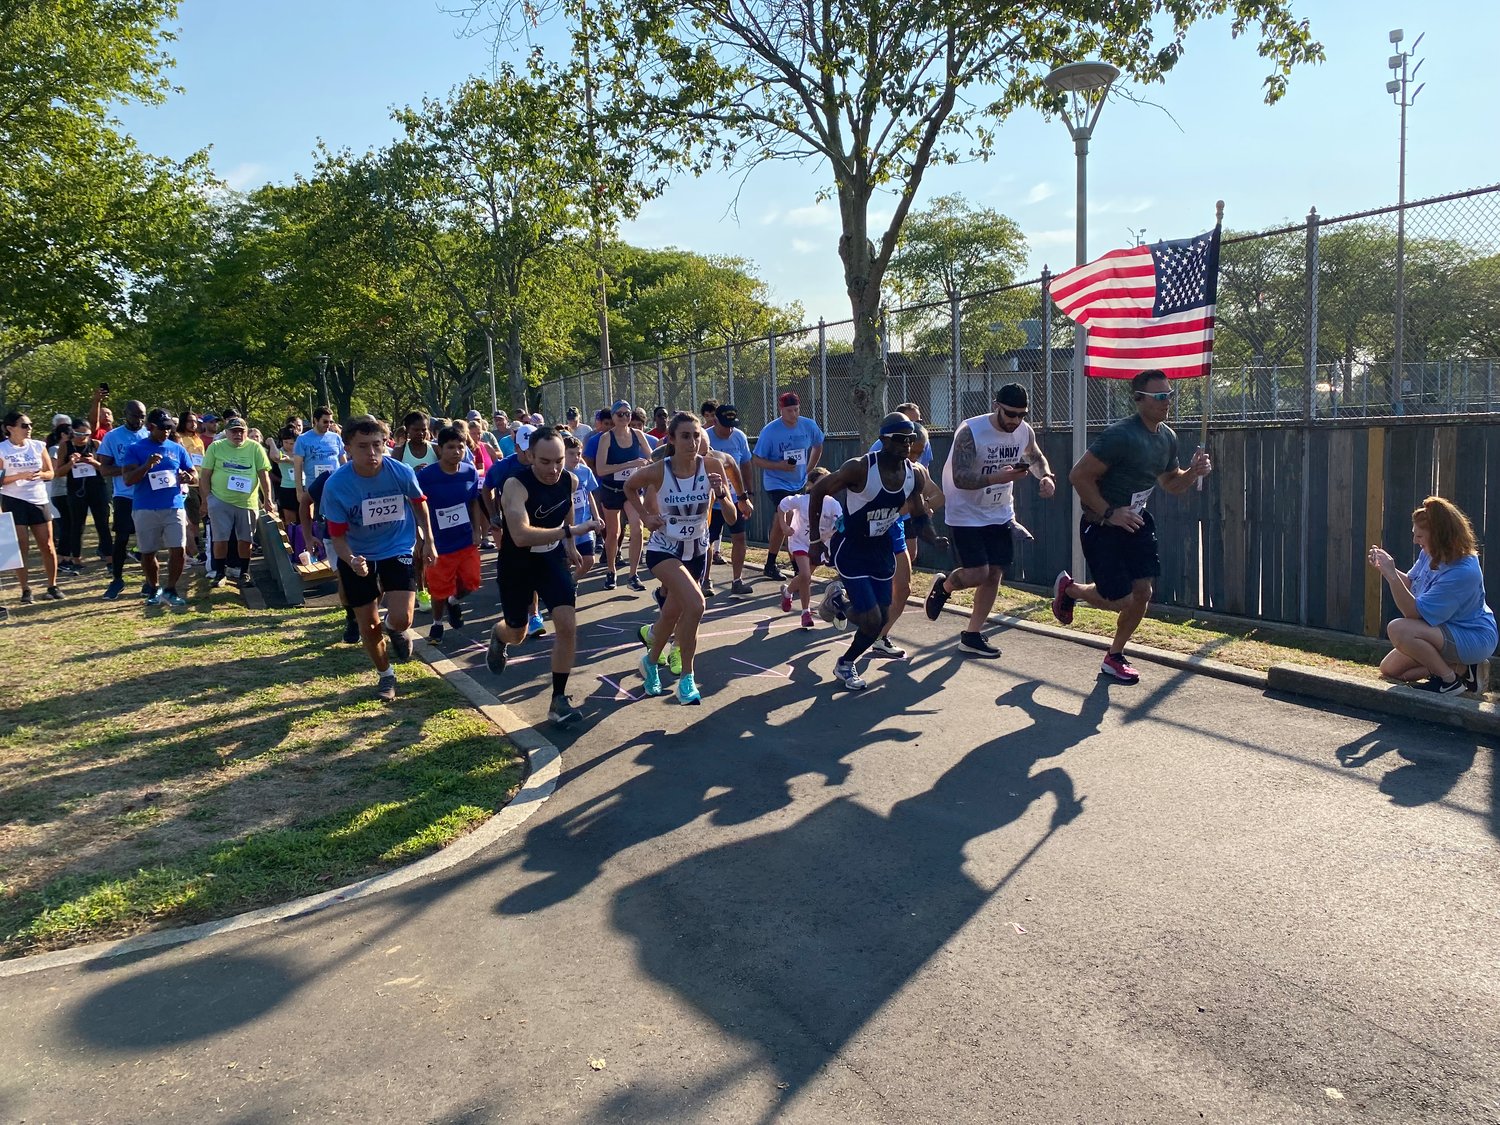 Greg Waxman, holding a flag on the right, Jonathan Davis, to his left, and other participants started the 5K race.